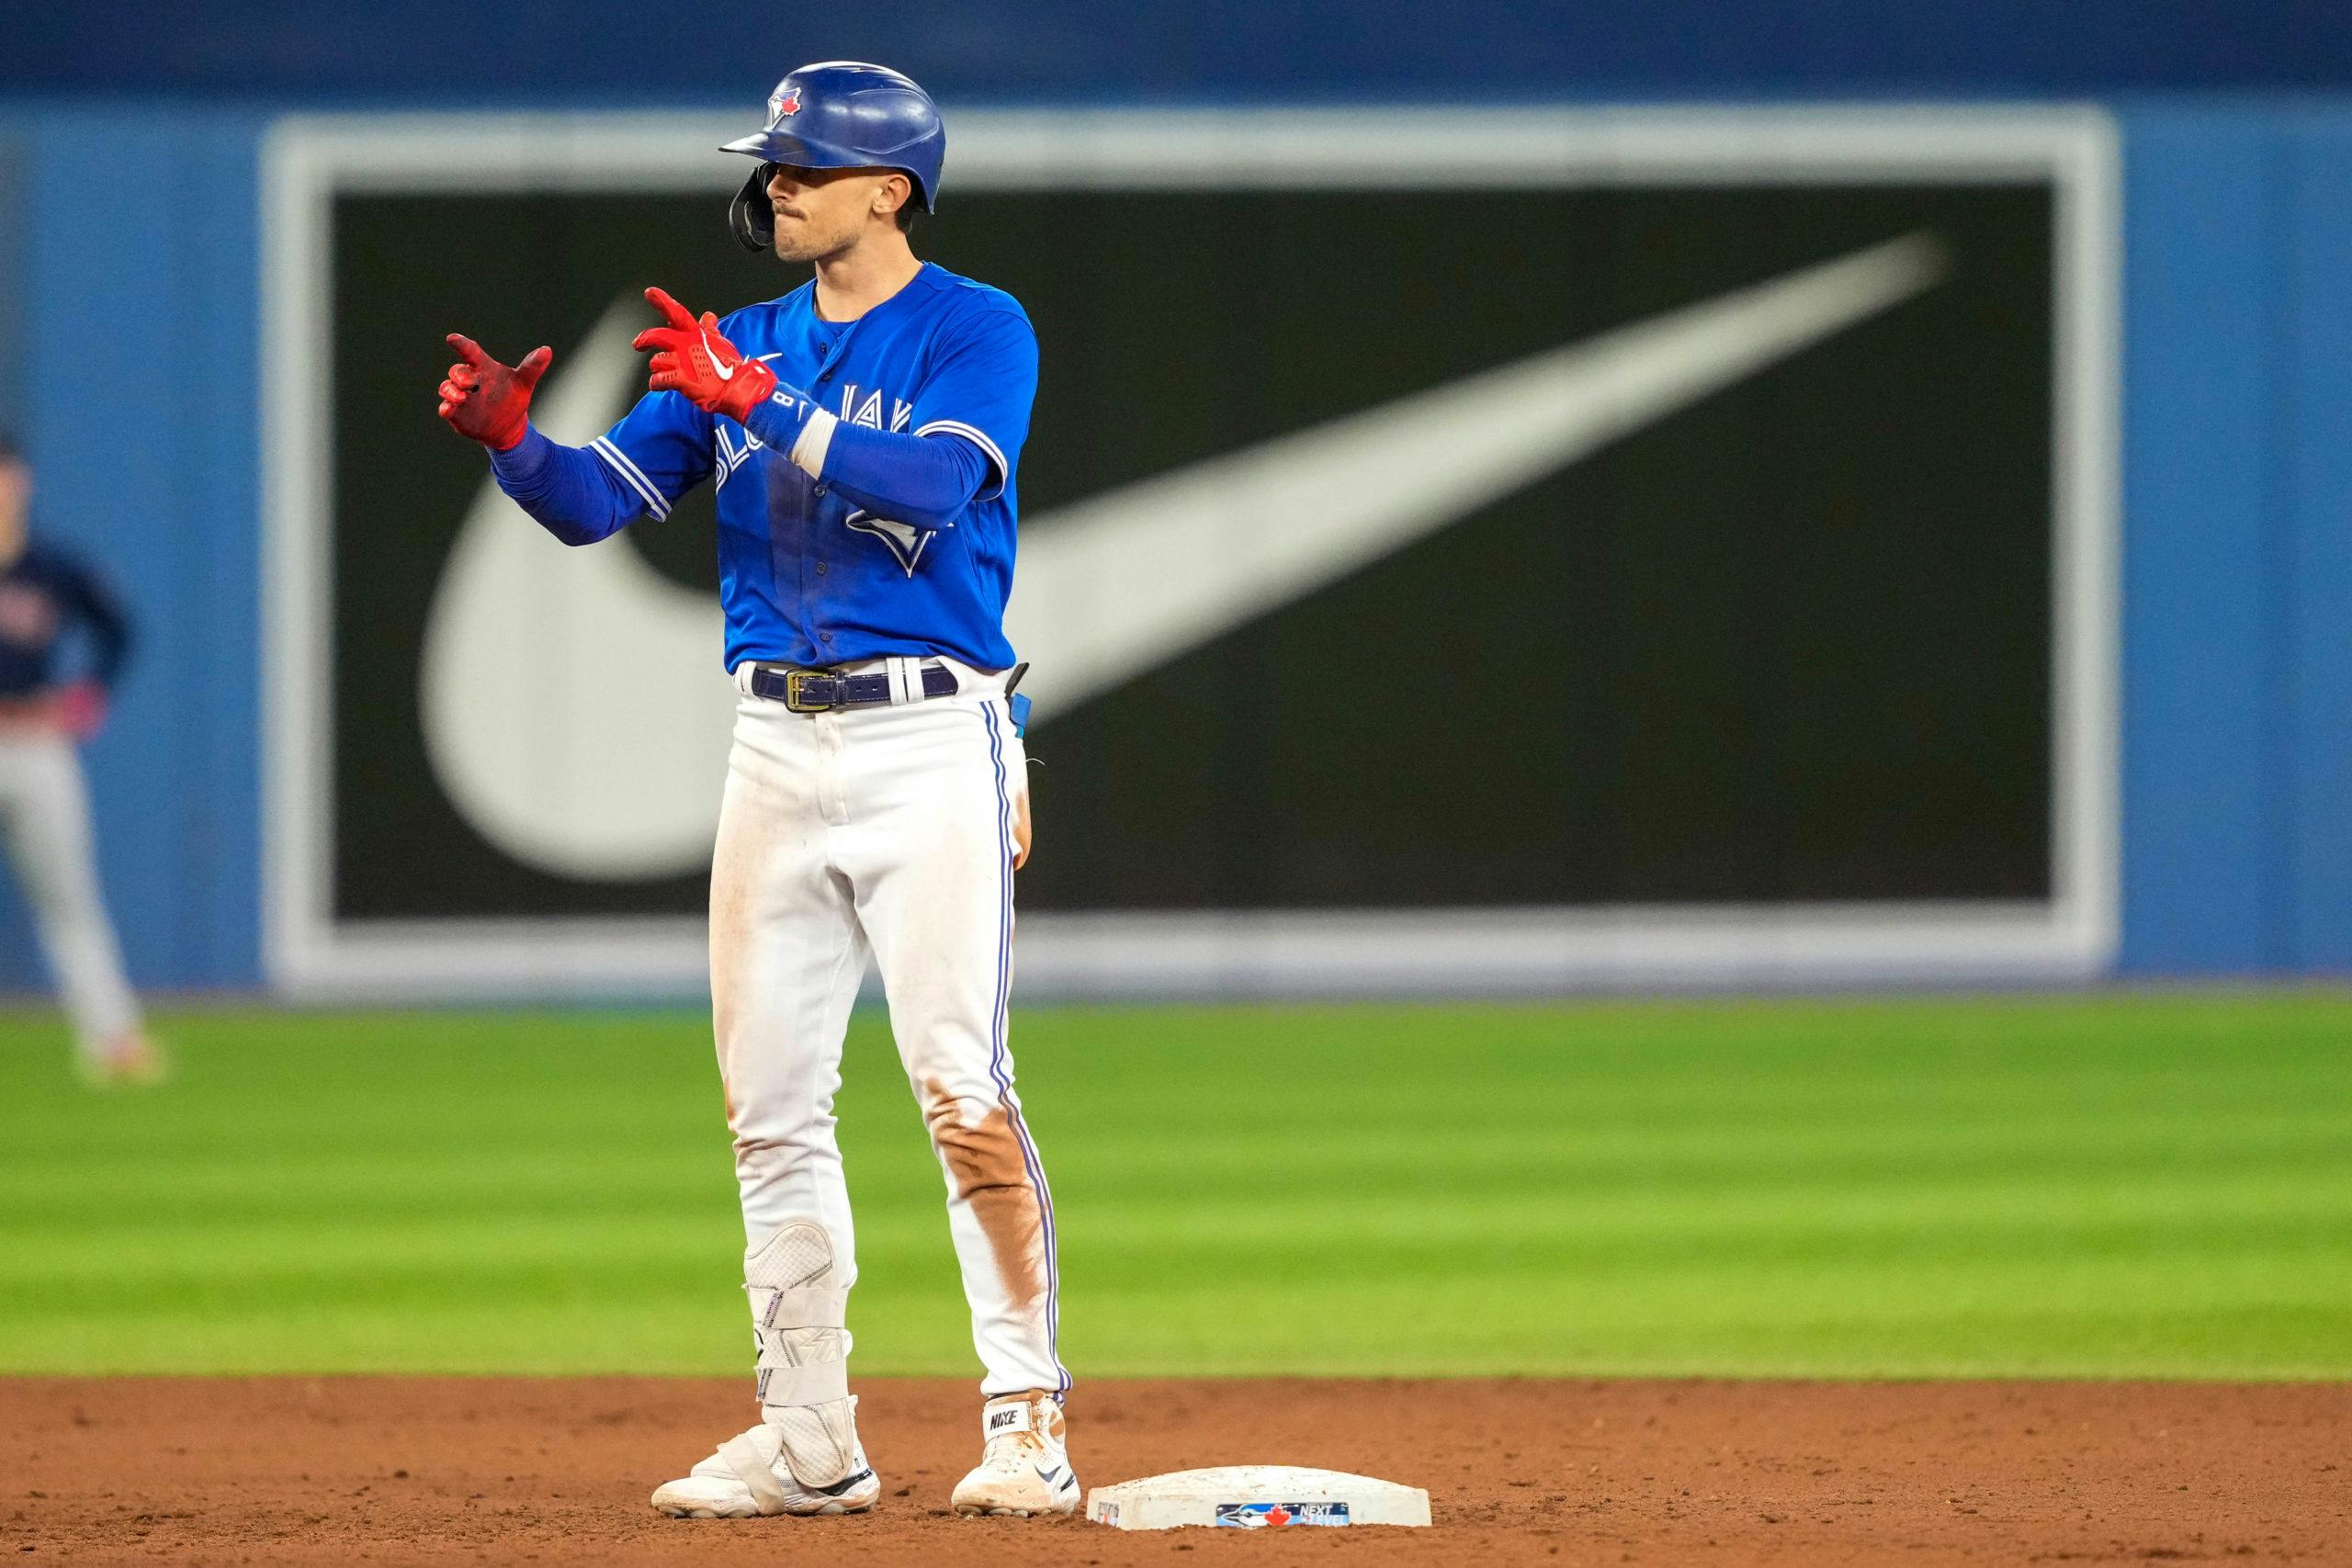 Cavan Biggio settling into his reserve role with Blue Jays - BlueJaysNation